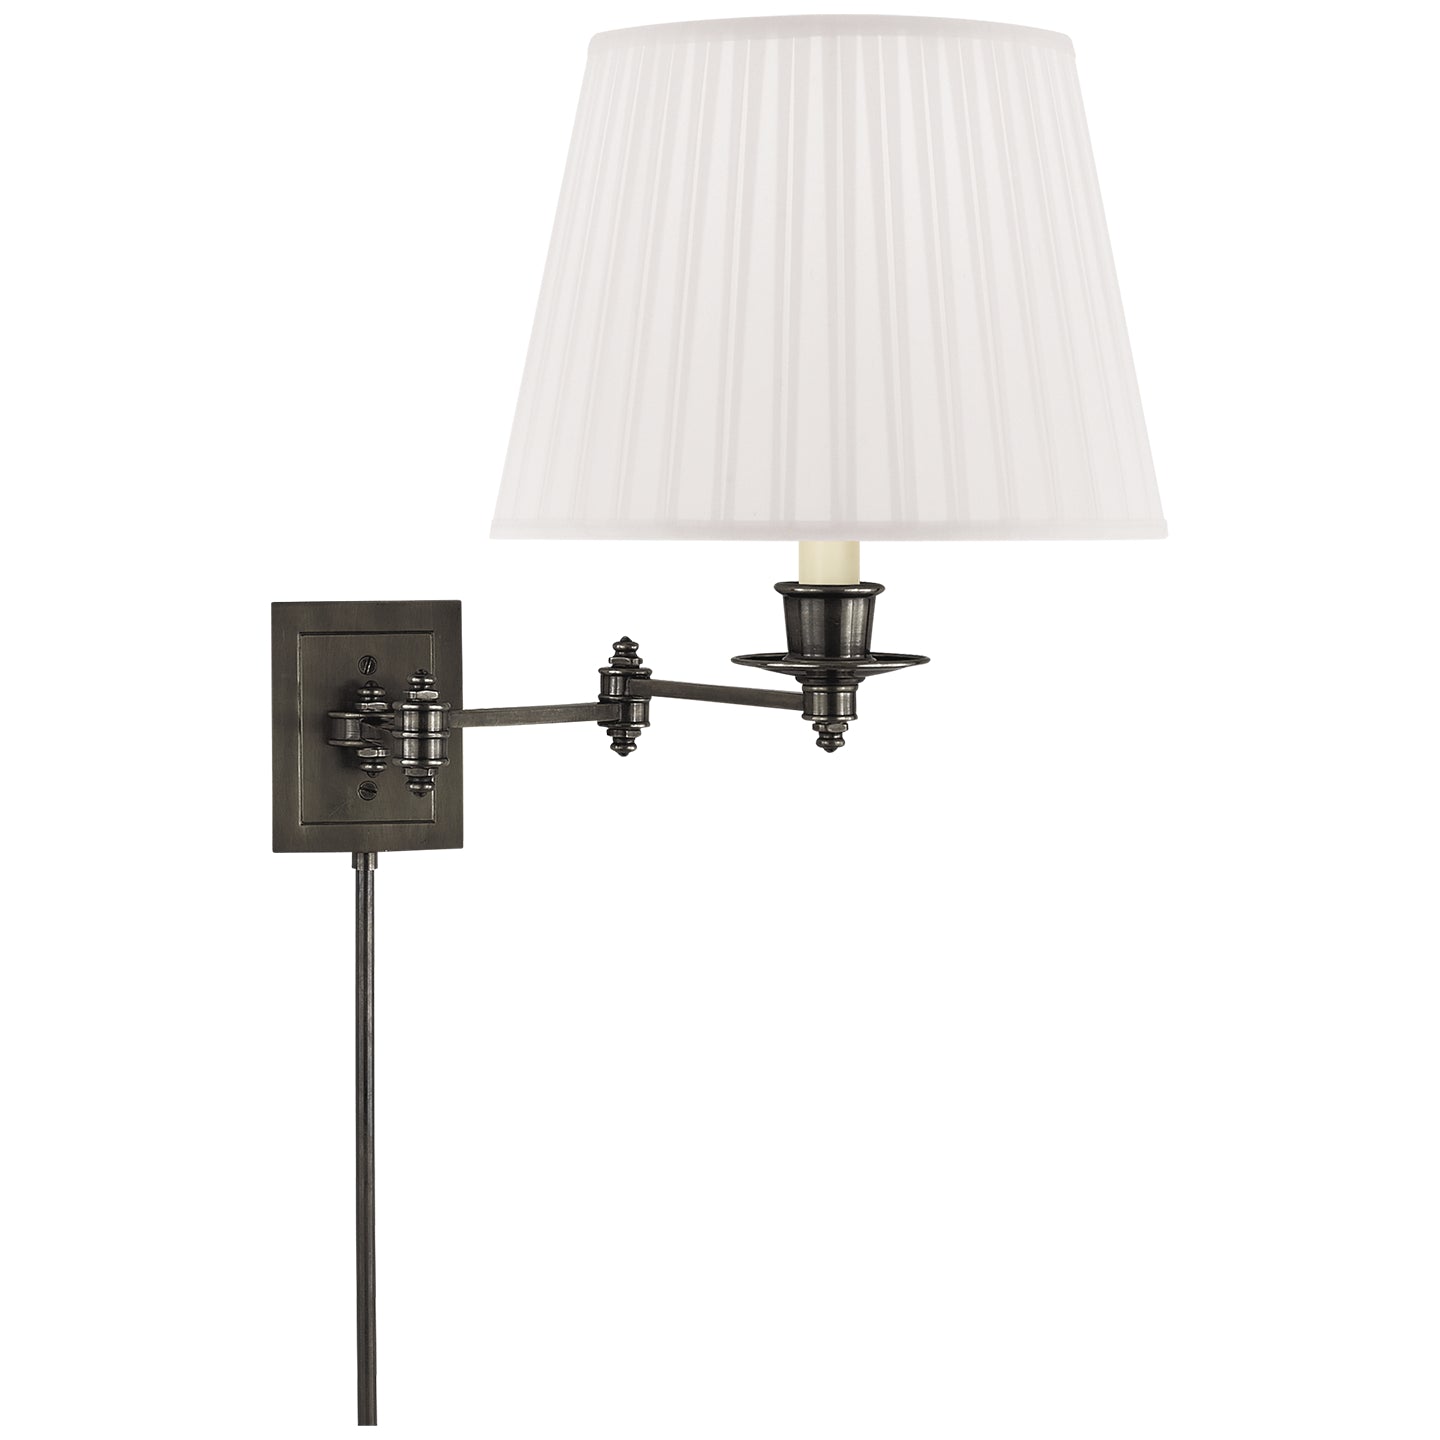 Load image into Gallery viewer, Visual Comfort Signature - S 2000BZ-S - One Light Swing Arm Wall Lamp - Swing Arm Sconce - Bronze
